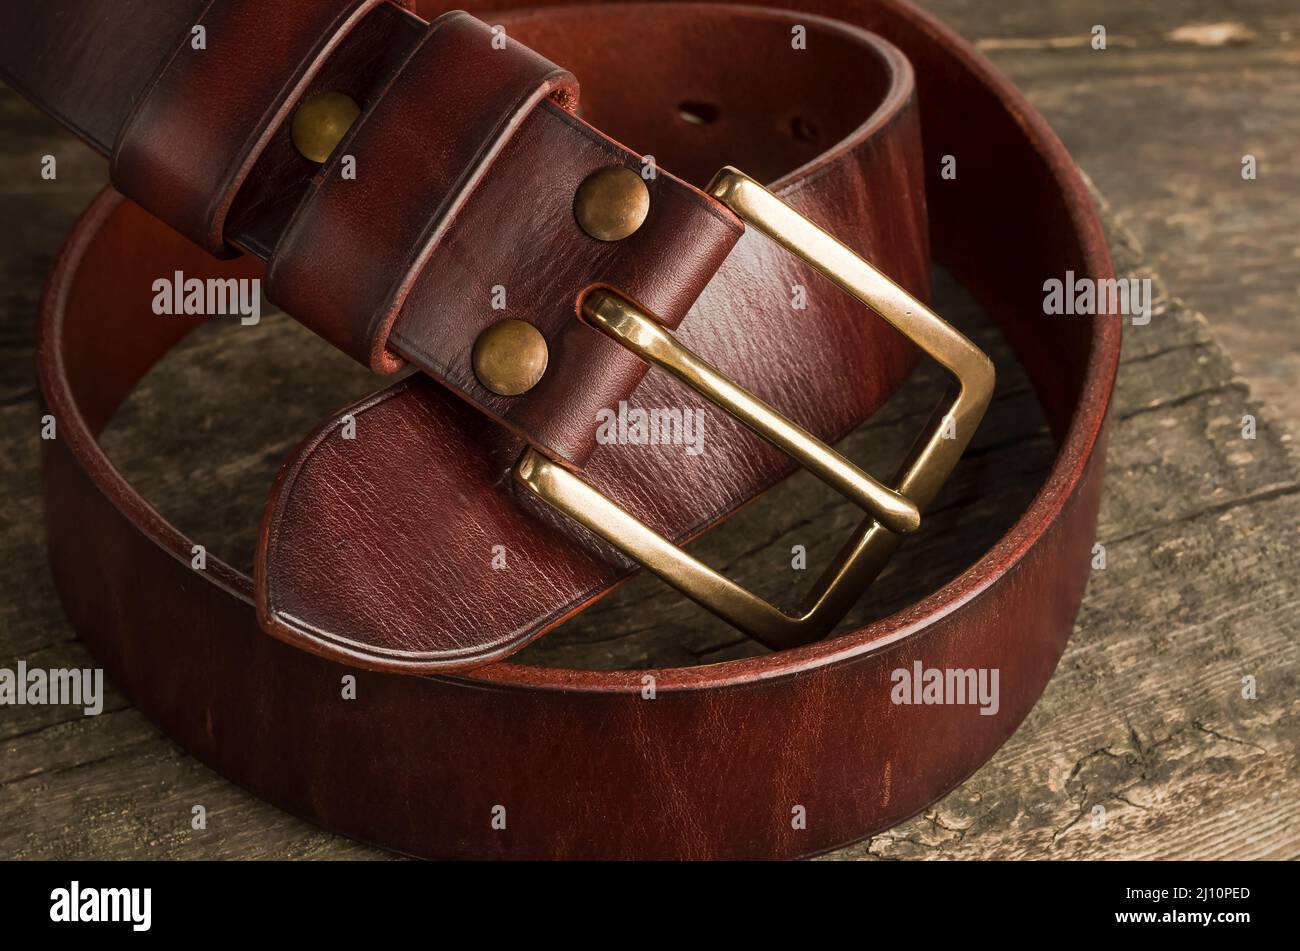 Men's leather trouser belt in brown color on an old vintage wooden background. Stock Photo